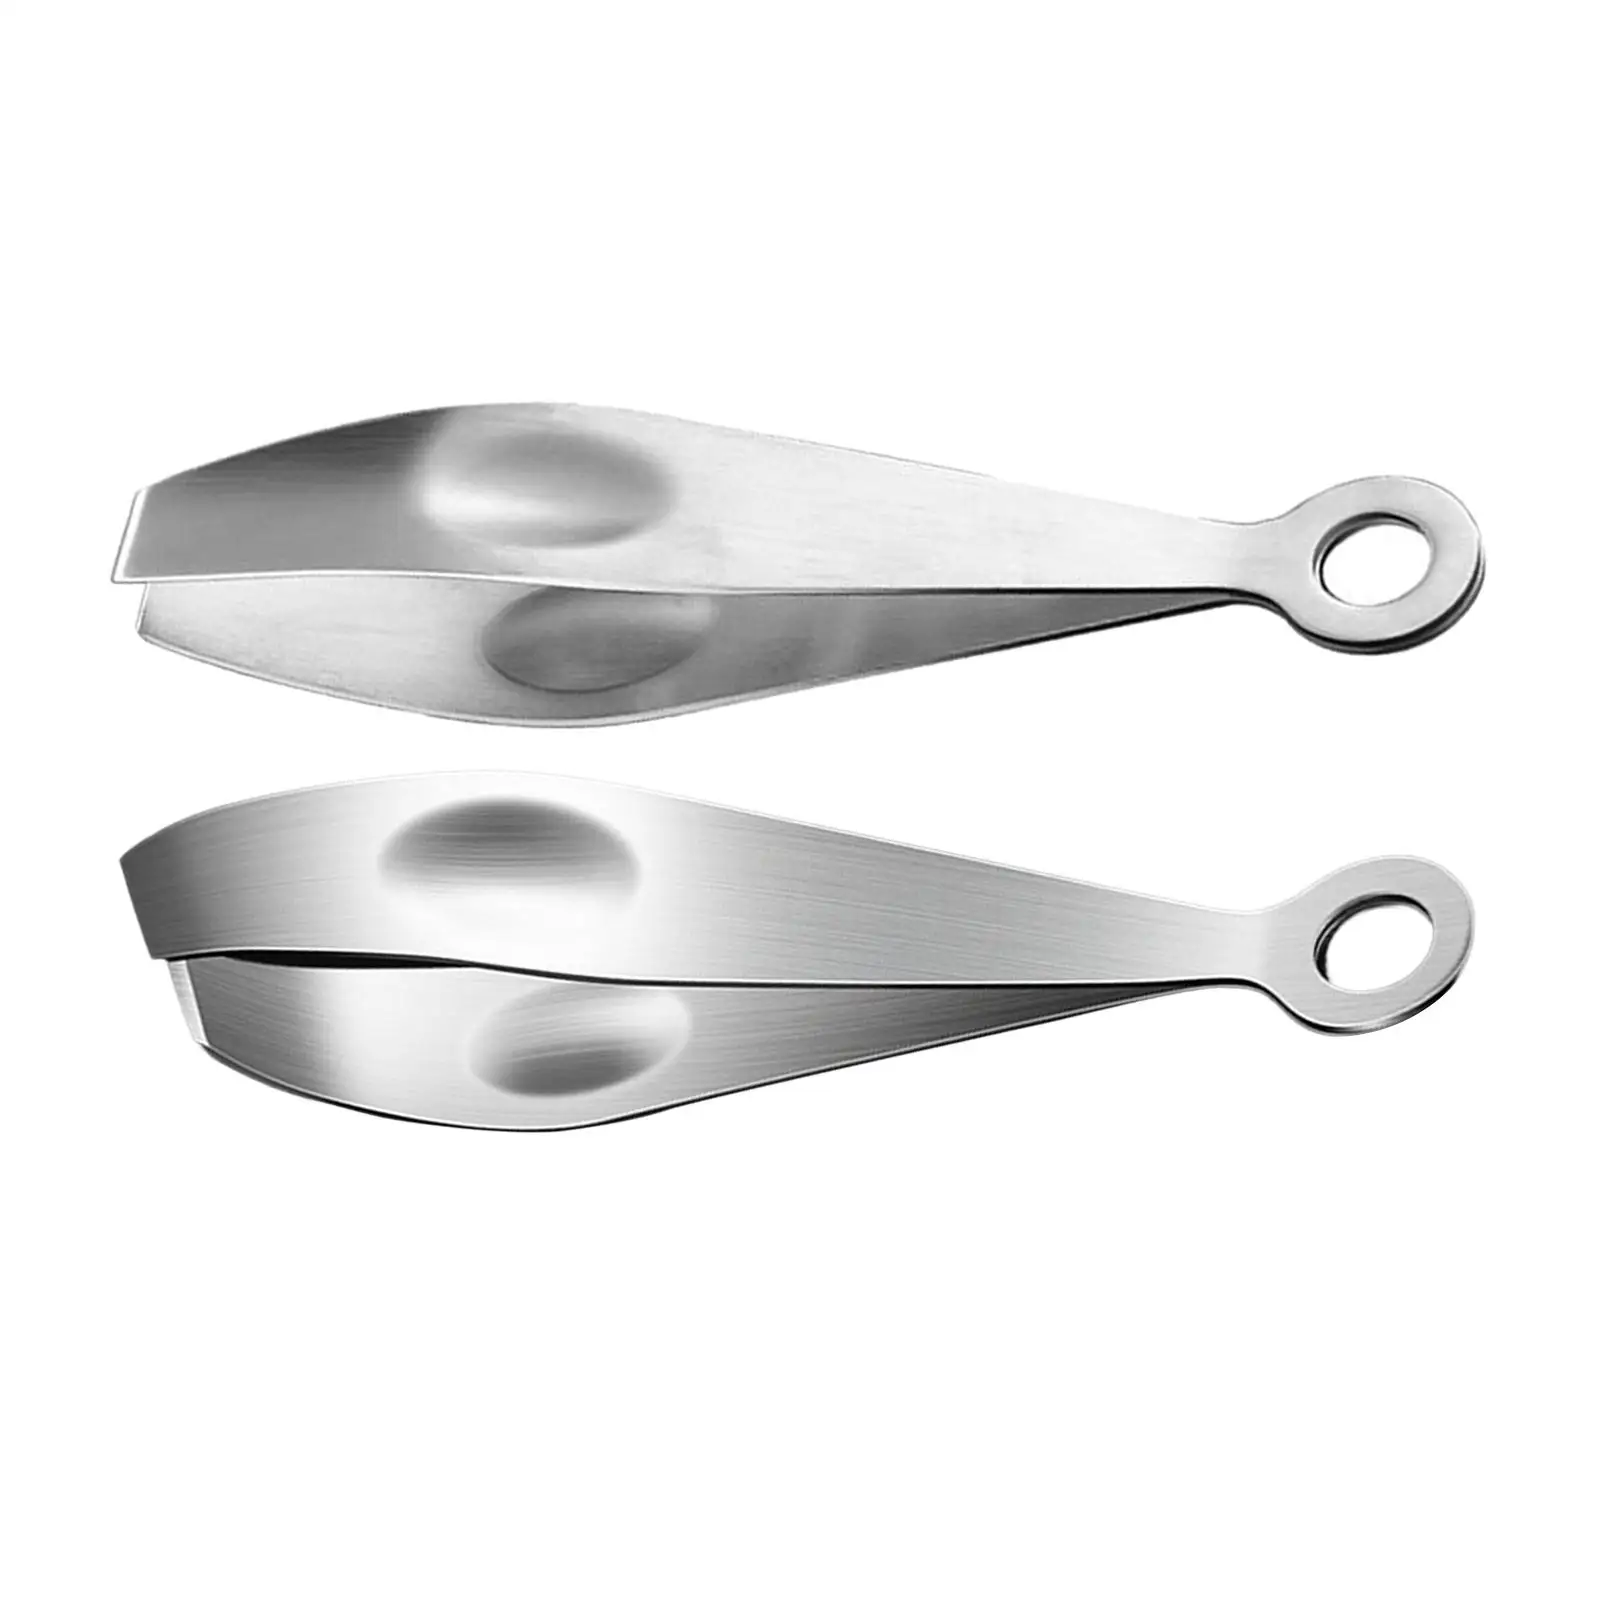 Stainless Steel Plucking Clip Seafood Tools Multipurpose Plucking Clamp Kitchen